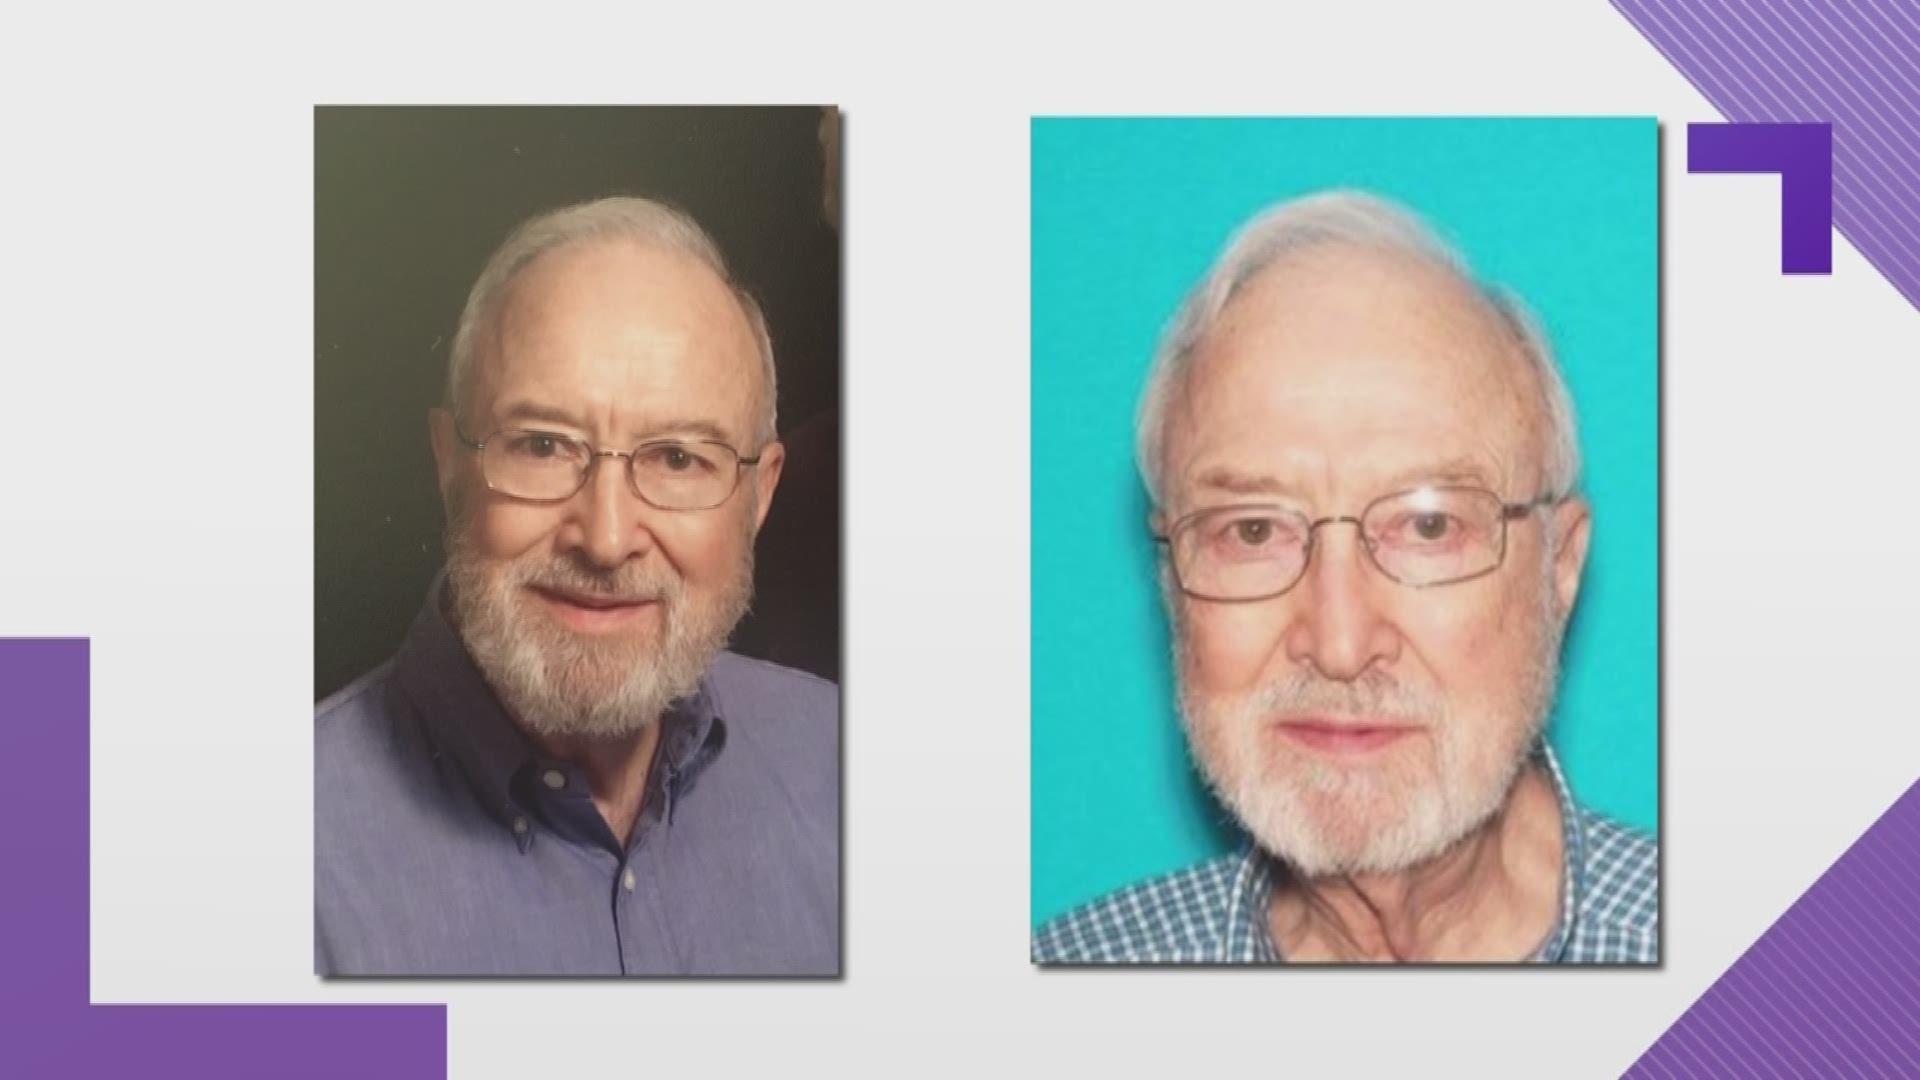 The KCSO said 78-year-old John Preston left his home off Venice Road around 9:15 a.m. Tuesday and hasn't been seen since.